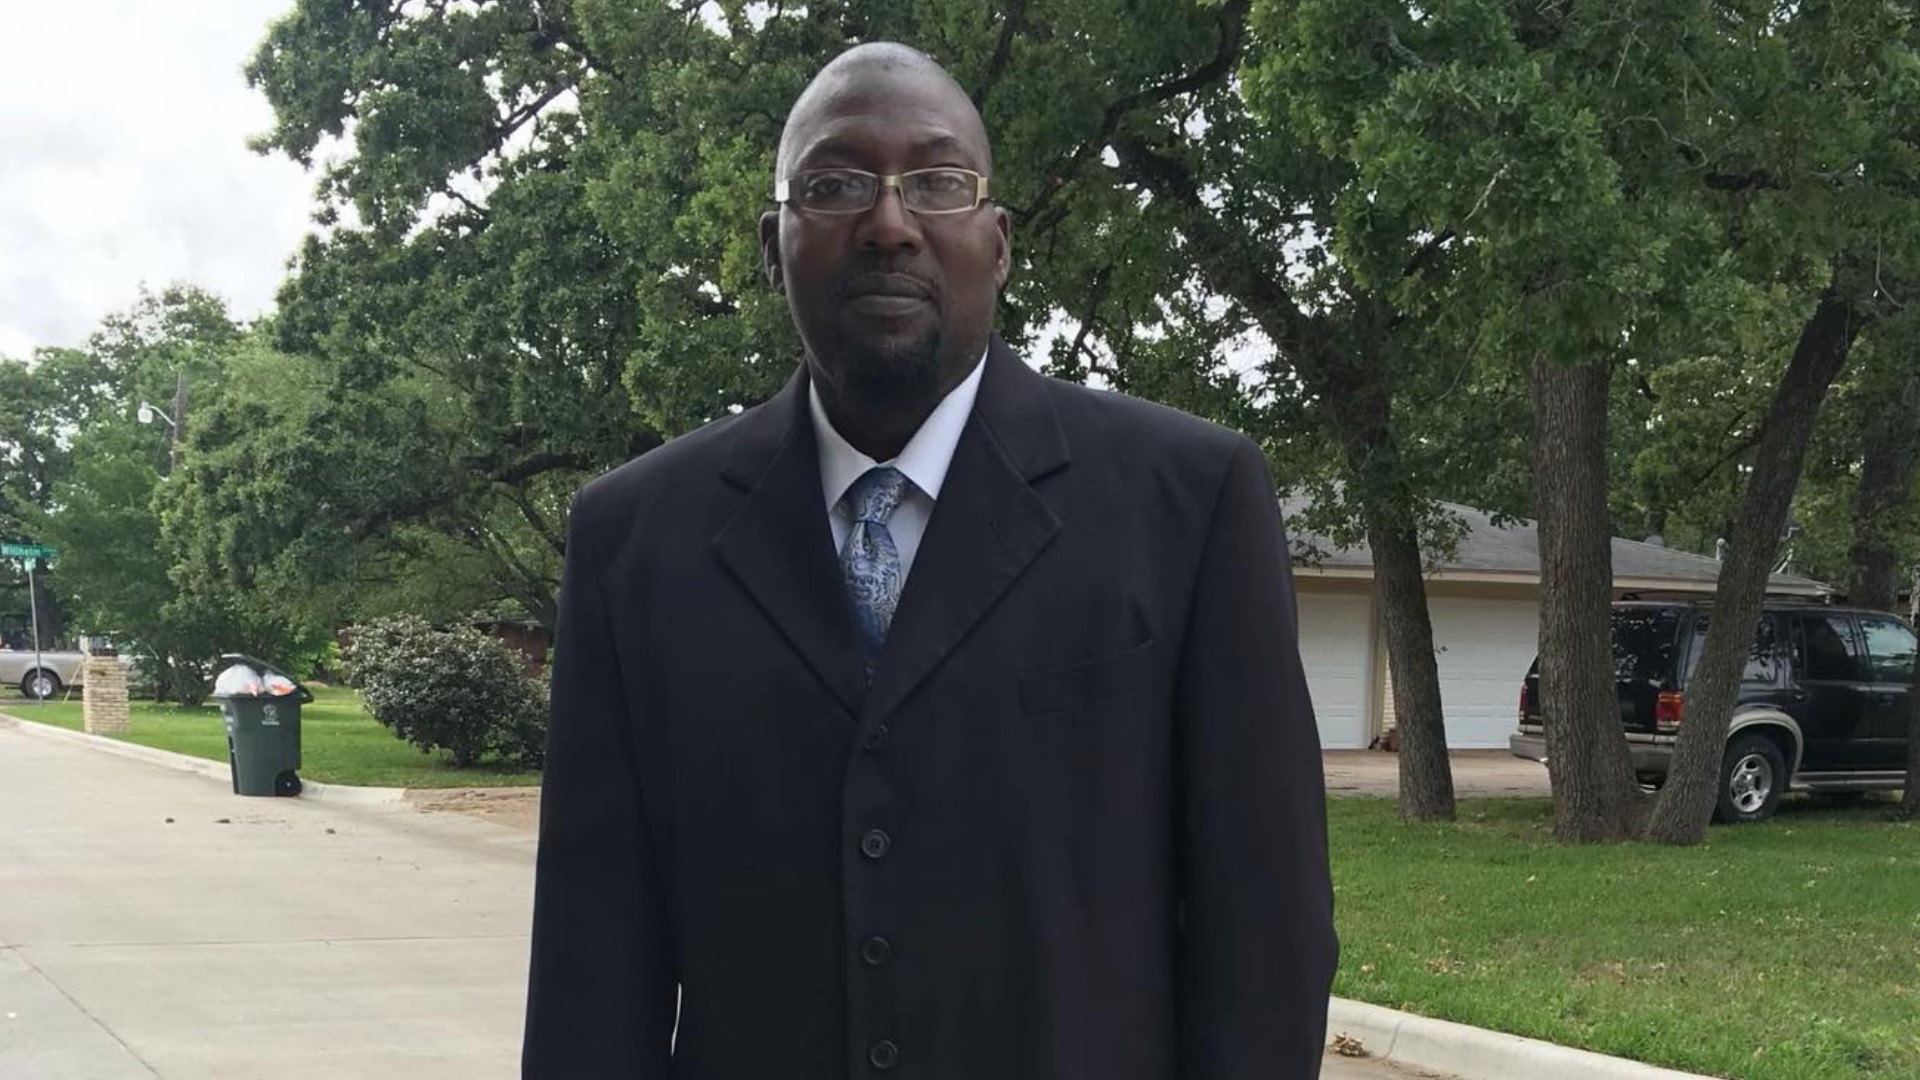 Patrick Warren, 52, was shot by a Killeen police officer while responding to a mental health call. Warren later died of the injuries.